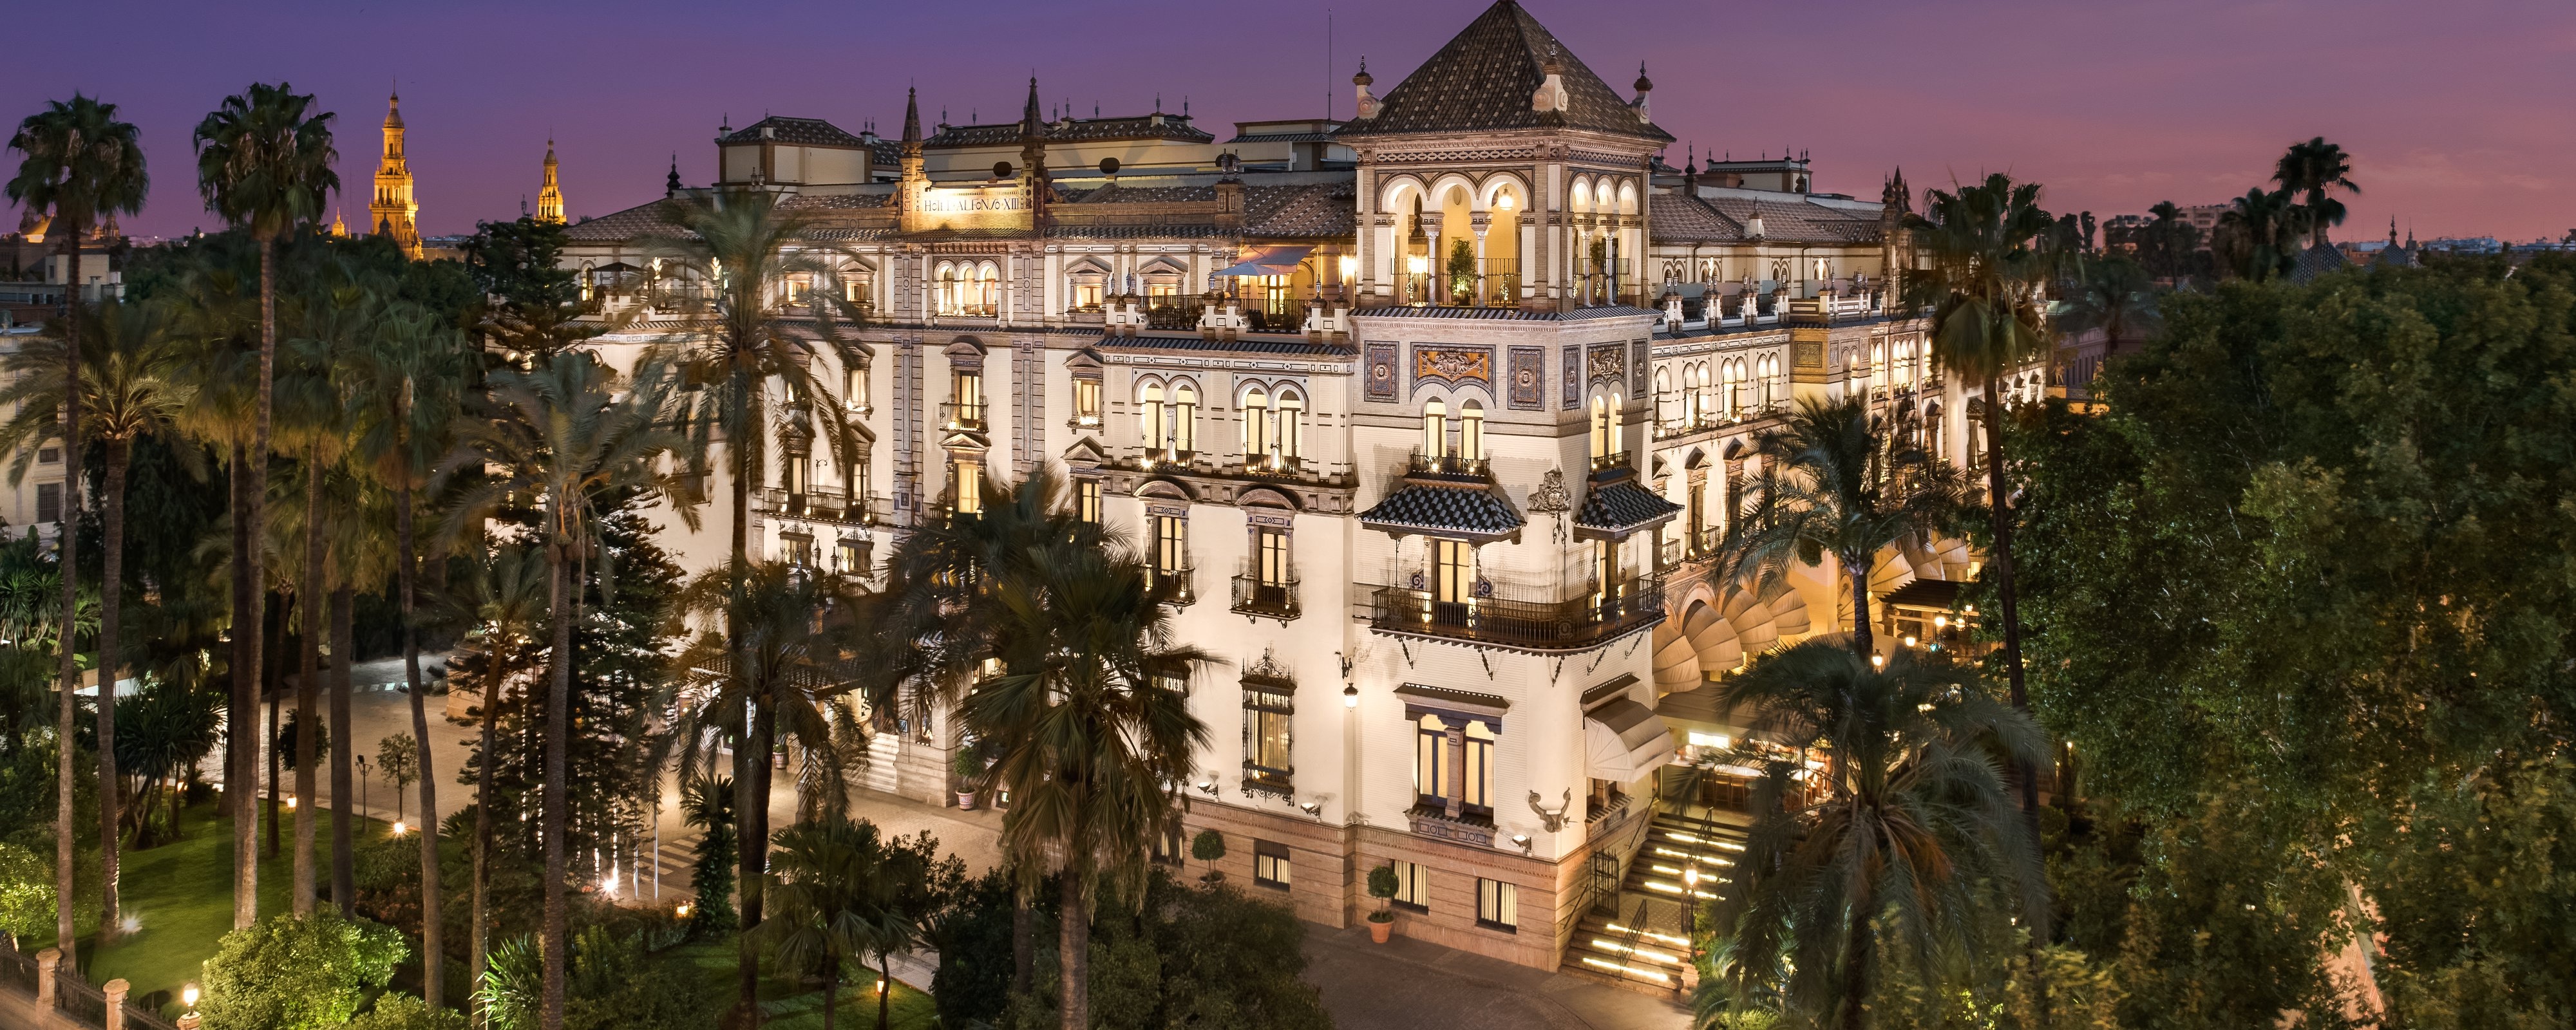 Image for Hotel Alfonso XIII, a Luxury Collection Hotel, Seville, a Marriott hotel.